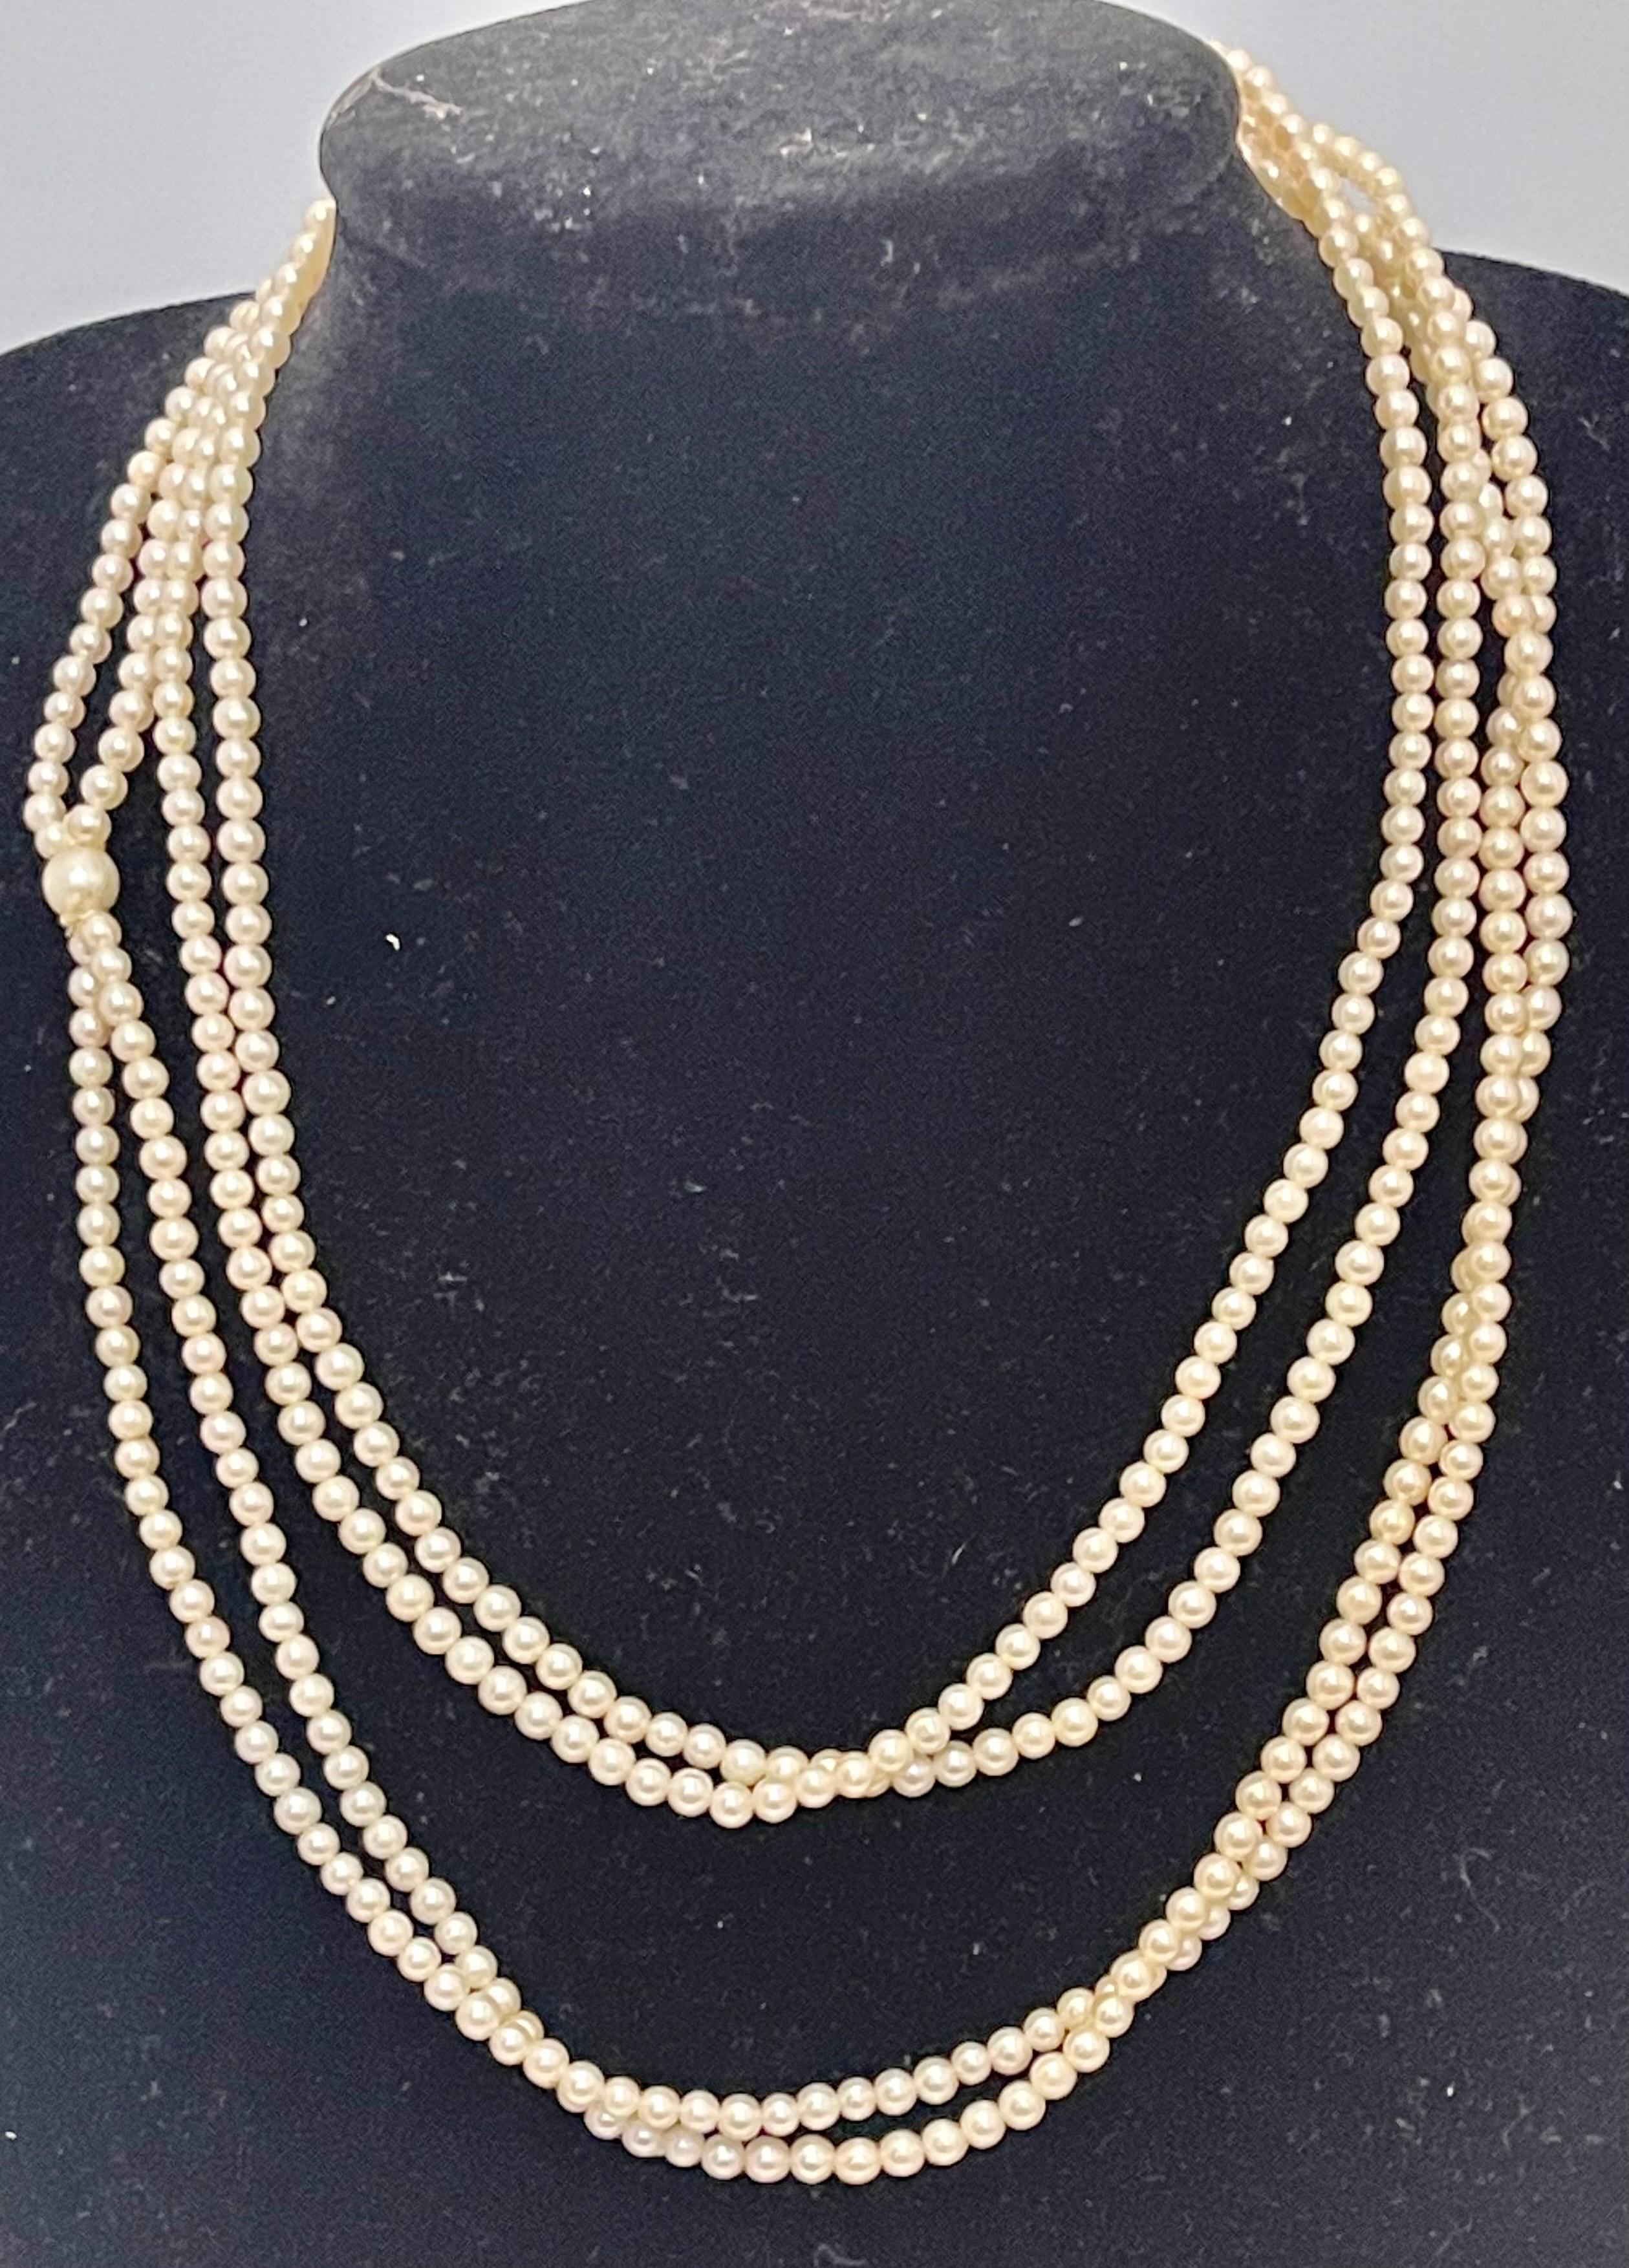 This marvelous vintage Pearl necklace features 2 row of luscious  Japanese Akoya   pearls
(measuring approx. 3.30MM )  
White color
VINTAGE
PRE-OWNED 
 ESTATE PIECE
Length of  Strand including clasp  33 Inch
PEARLS ARE AVERAGE 3.3 MM
ALL PEARLS ARE